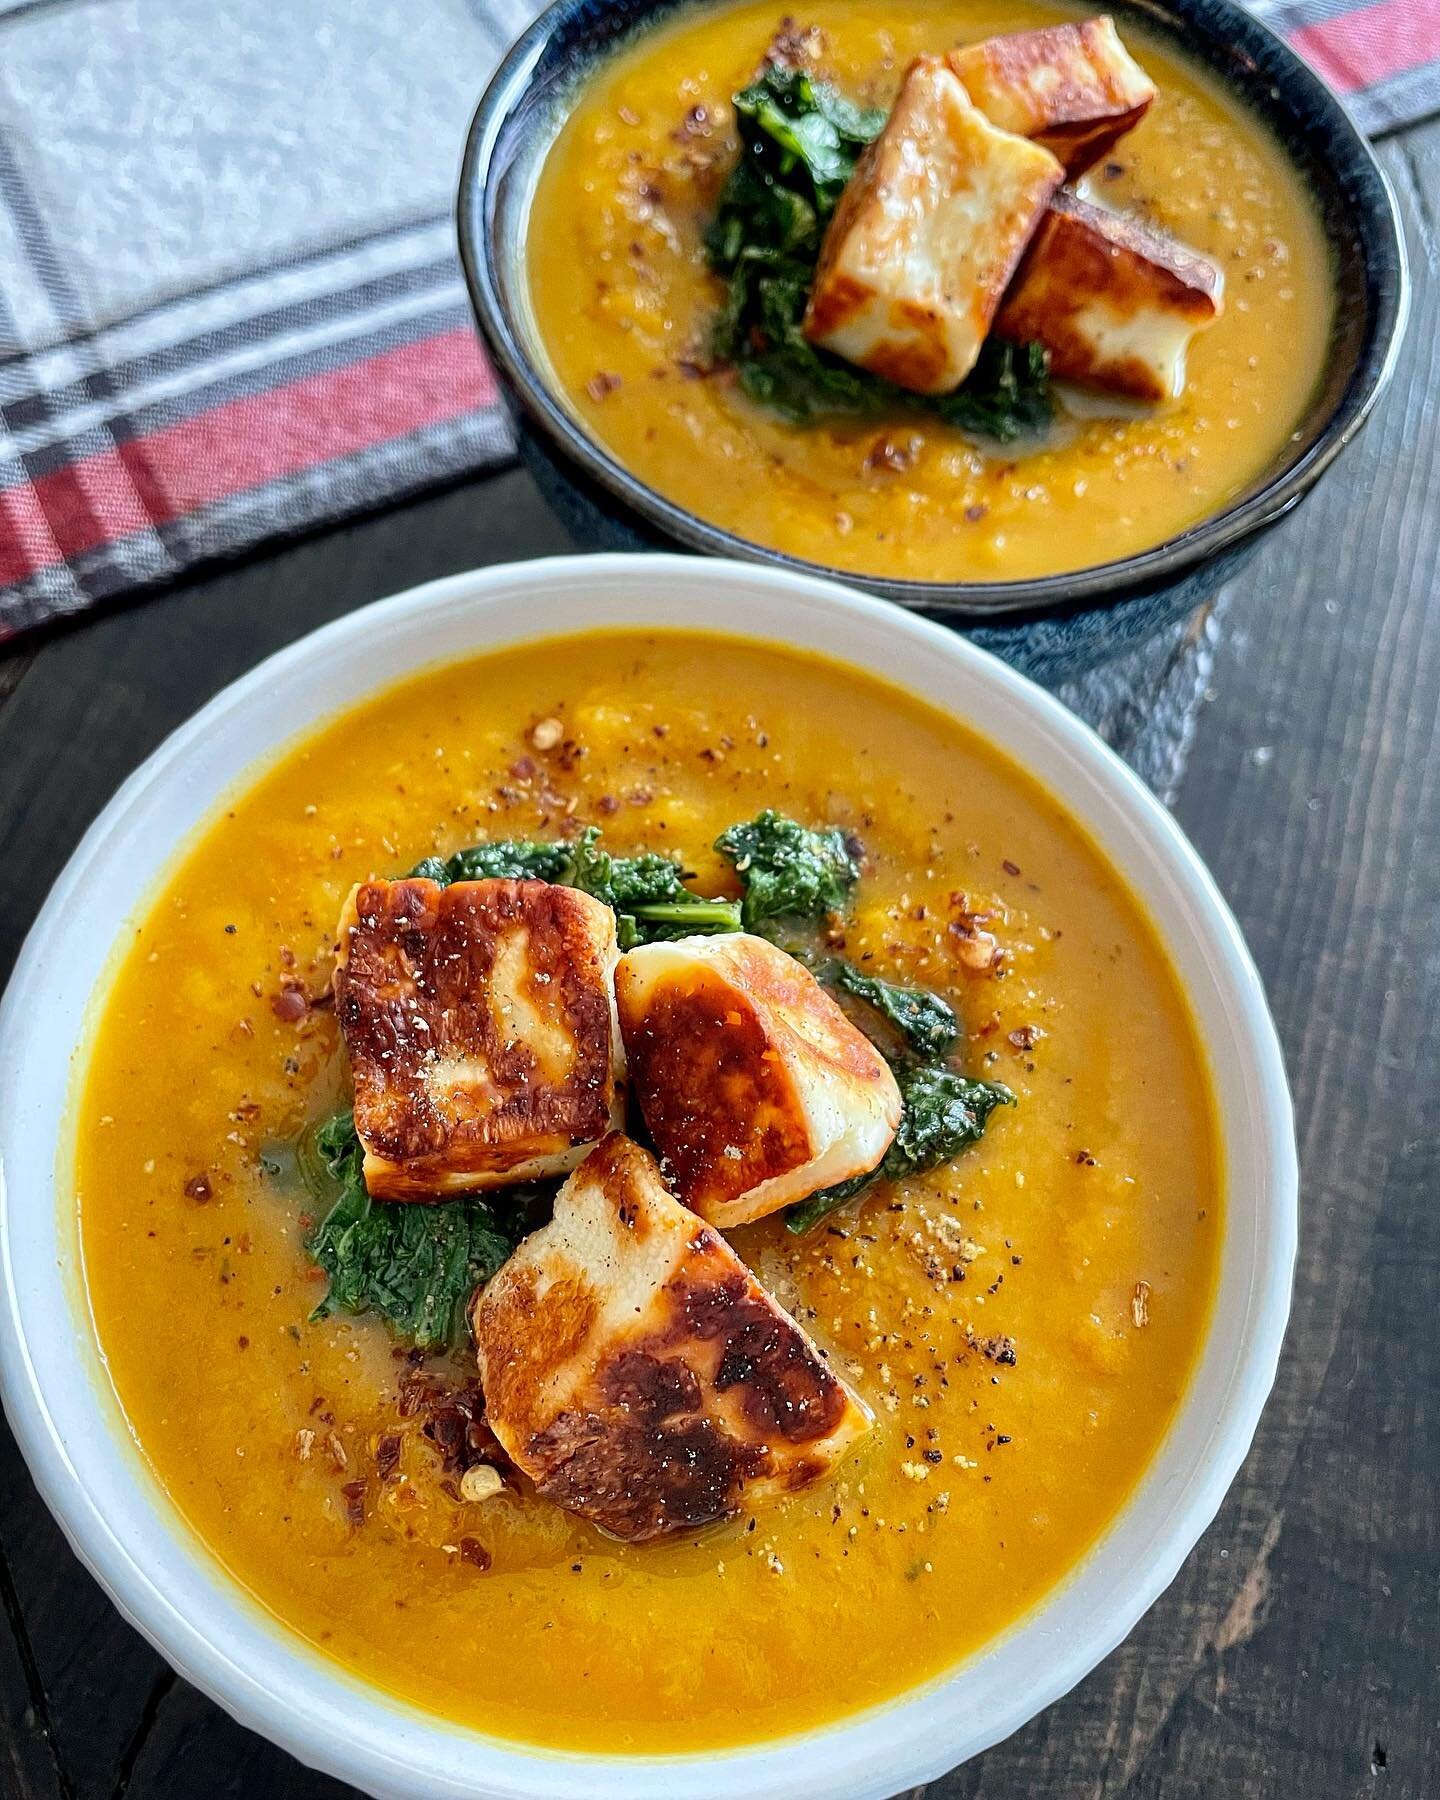 🥕ROASTED CARROT &amp; PARSNIP SOUP WITH HALLOUMI CROUTONS
 
This is your sign to use cheese as a crouton atop of your next pur&eacute;ed soup! These halloumi croutons were the perfect blend of salty and briny yumminess that took this bowl of goodnes